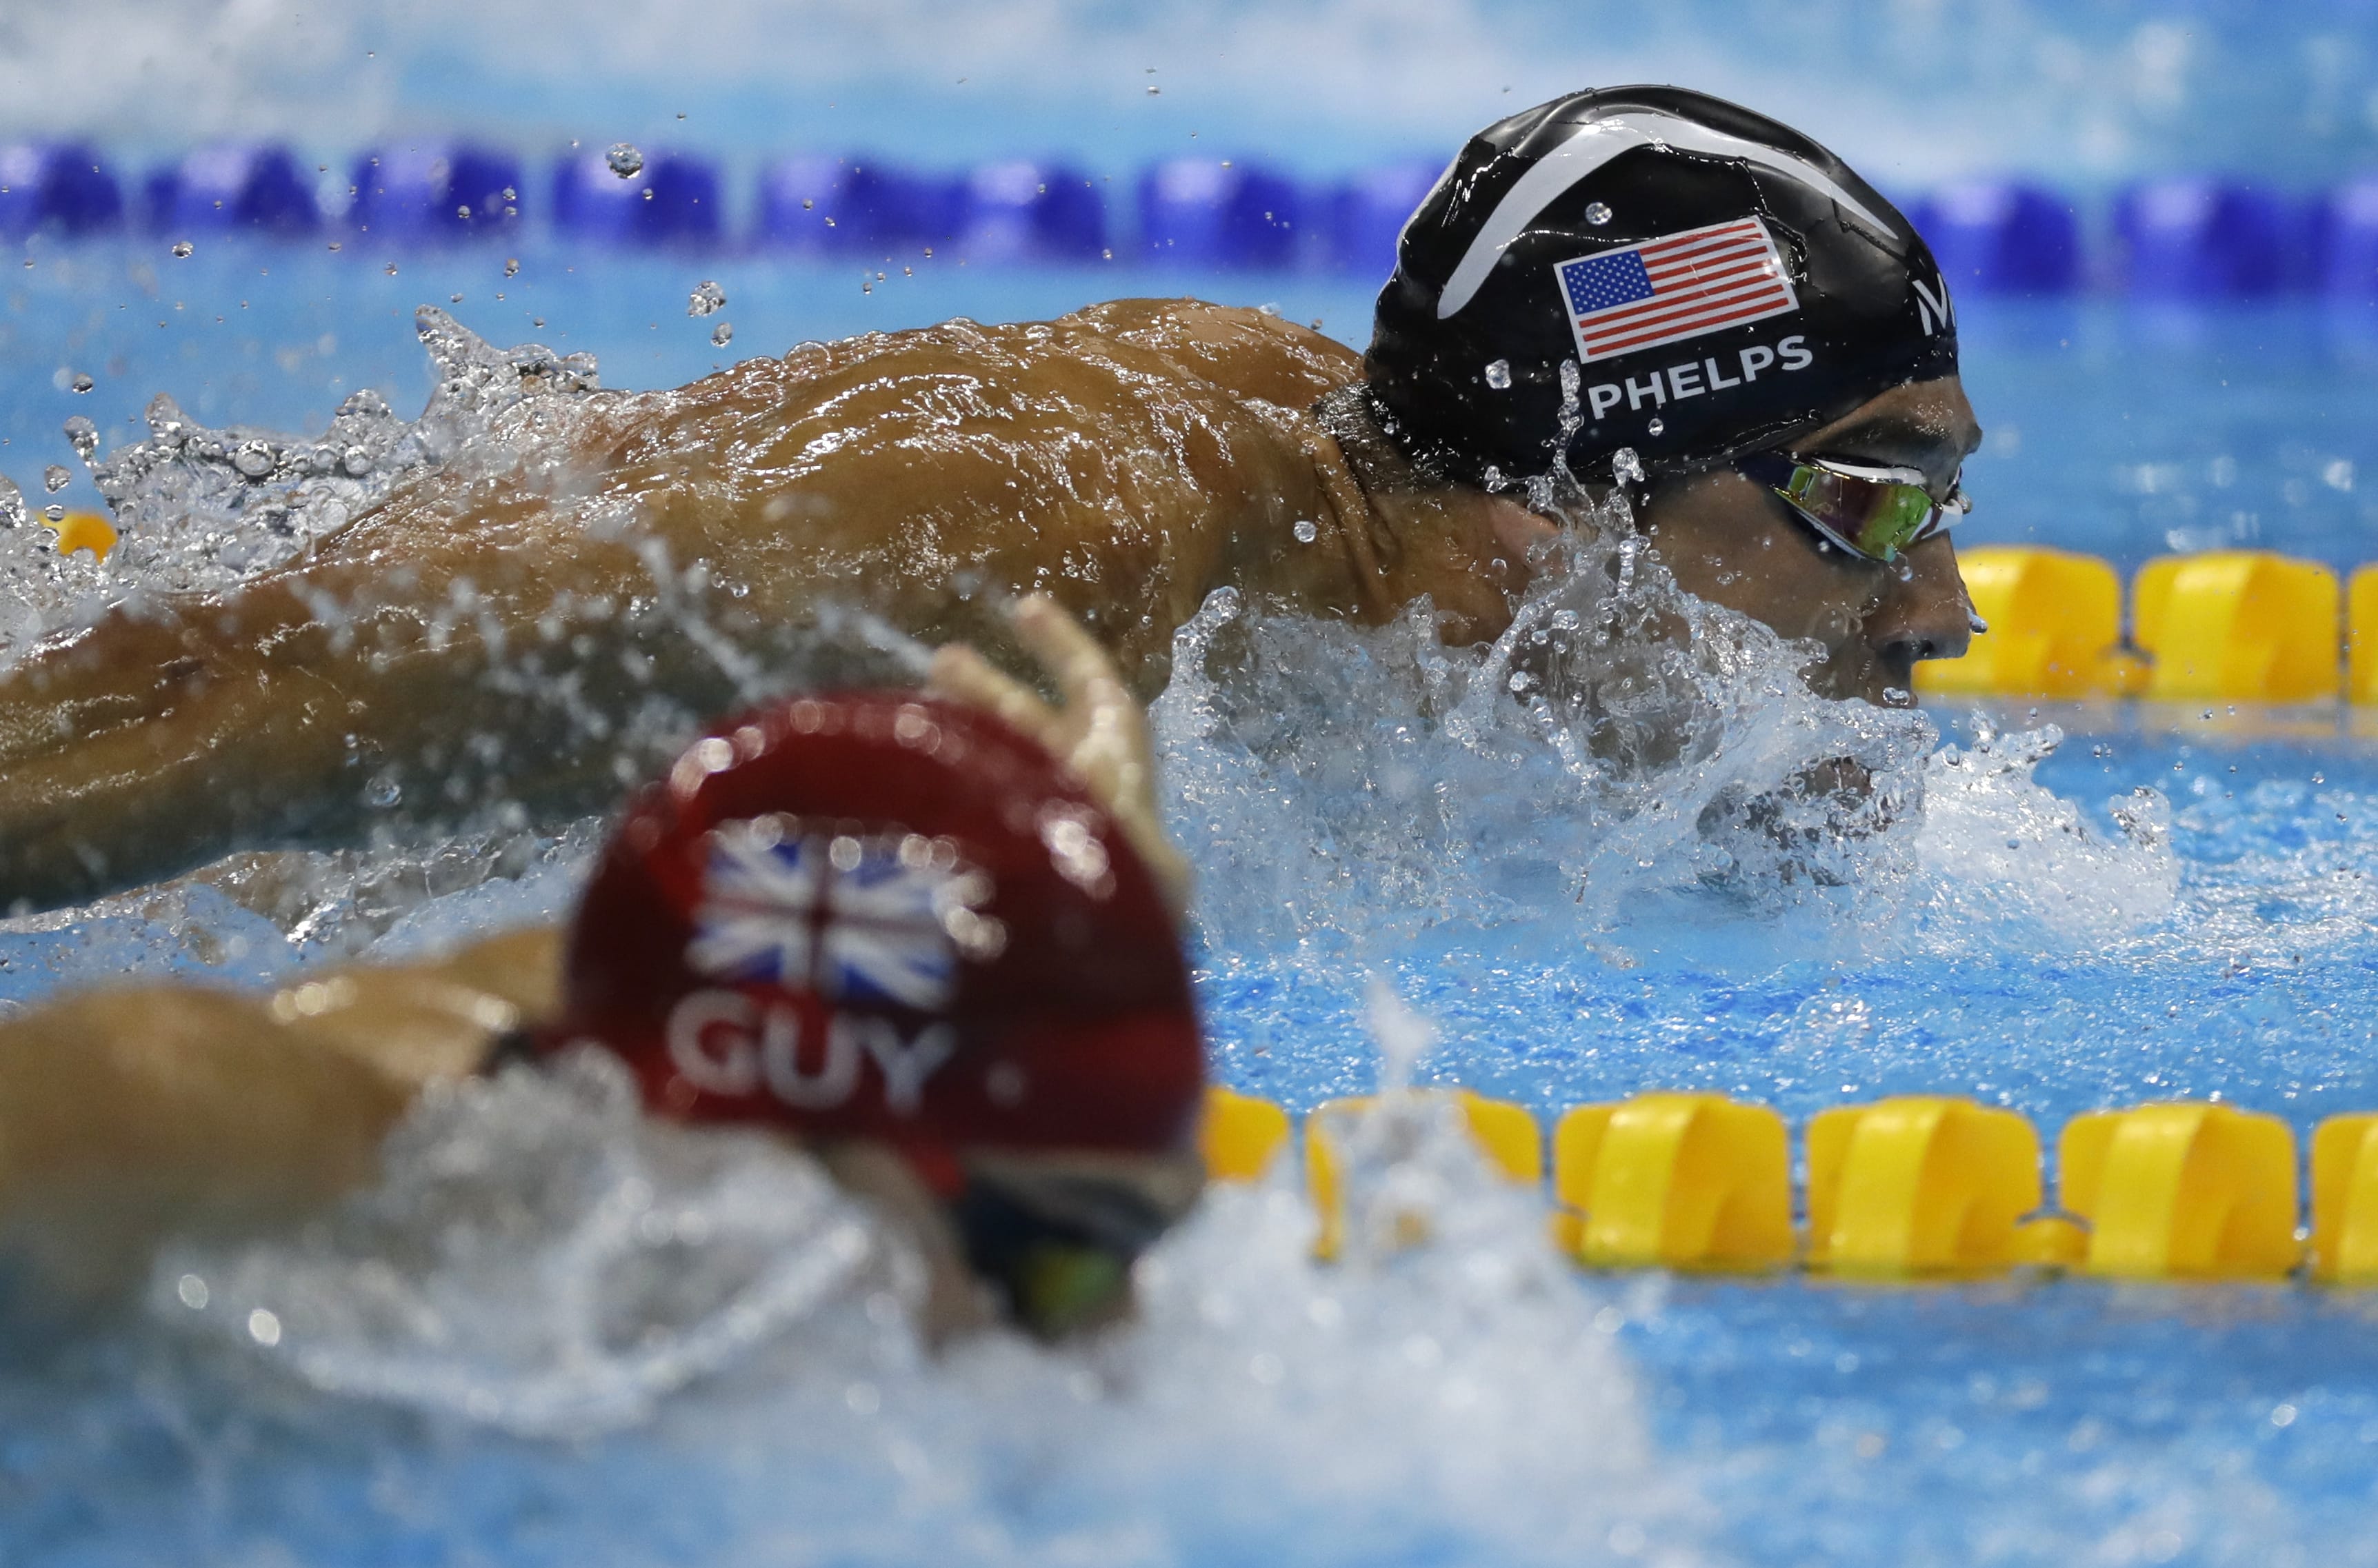 United States' Michael Phelps and Britain's James Guy compete in the men's 4 x 100-meter medley relay final during the swimming competitions at the 2016 Summer Olympics, Saturday, Aug. 13, 2016, in Rio de Janeiro, Brazil.